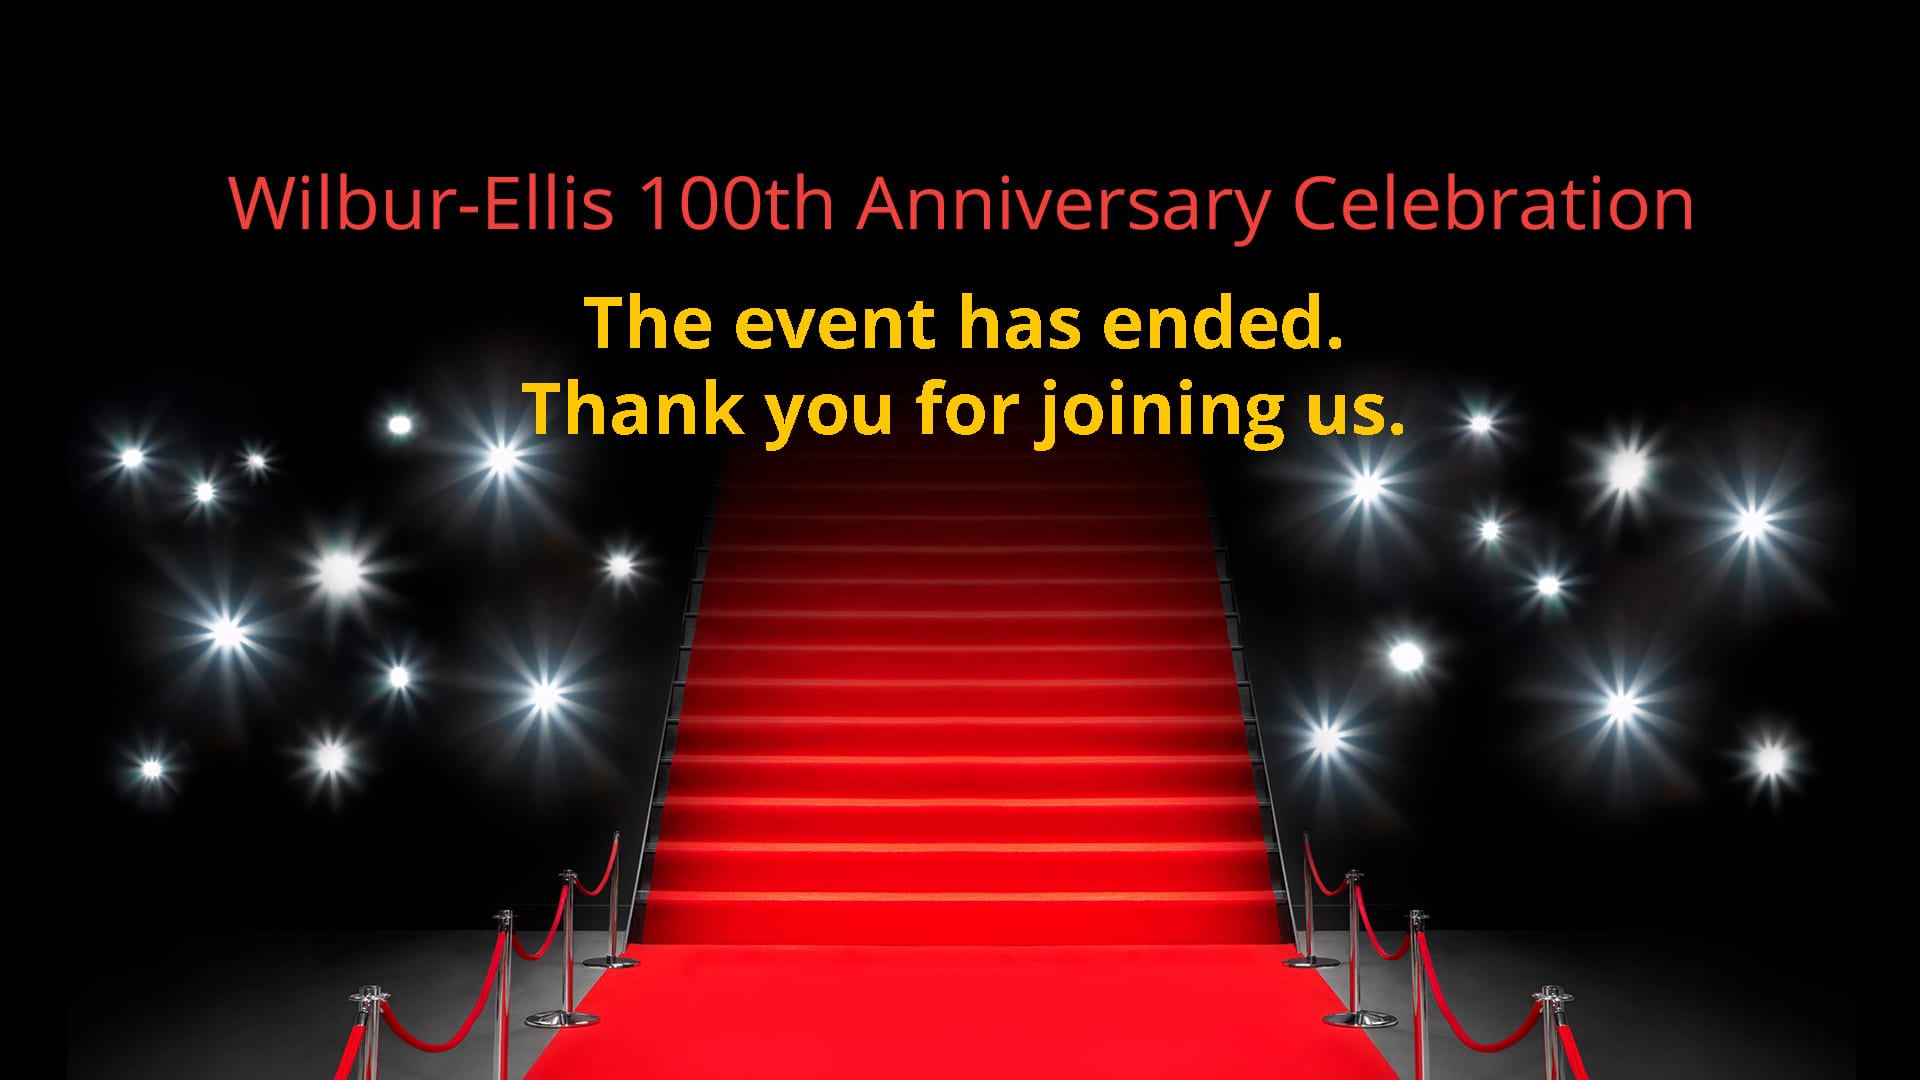 Wilbur-Ellis 100th Anniversary Celebration. The event has ended. Thank you for joining us.